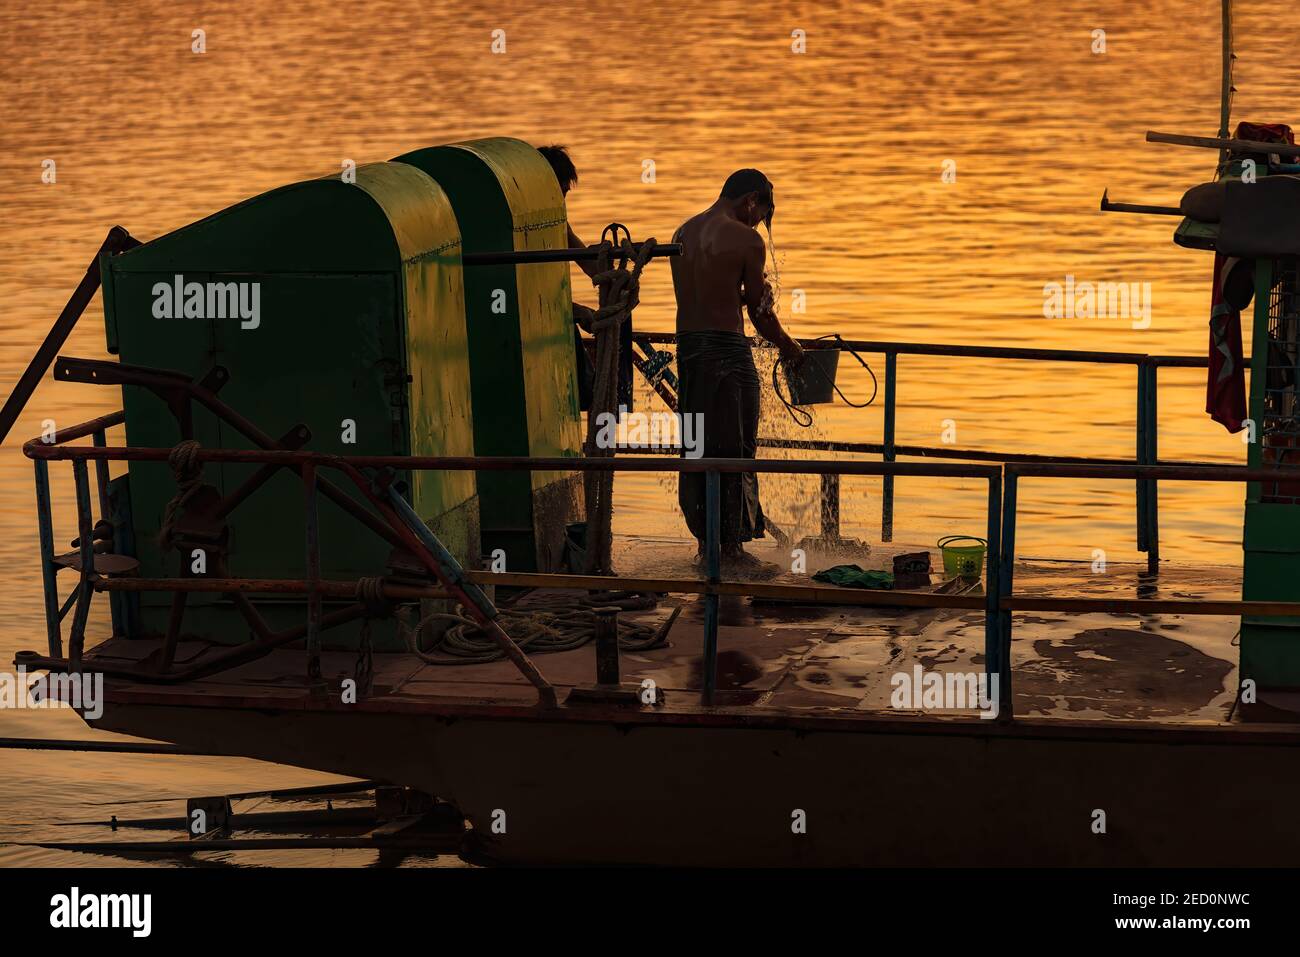 Monywa, Myanmar - December 22, 2019: View of a man taking a shower on his boat before going to home Stock Photo